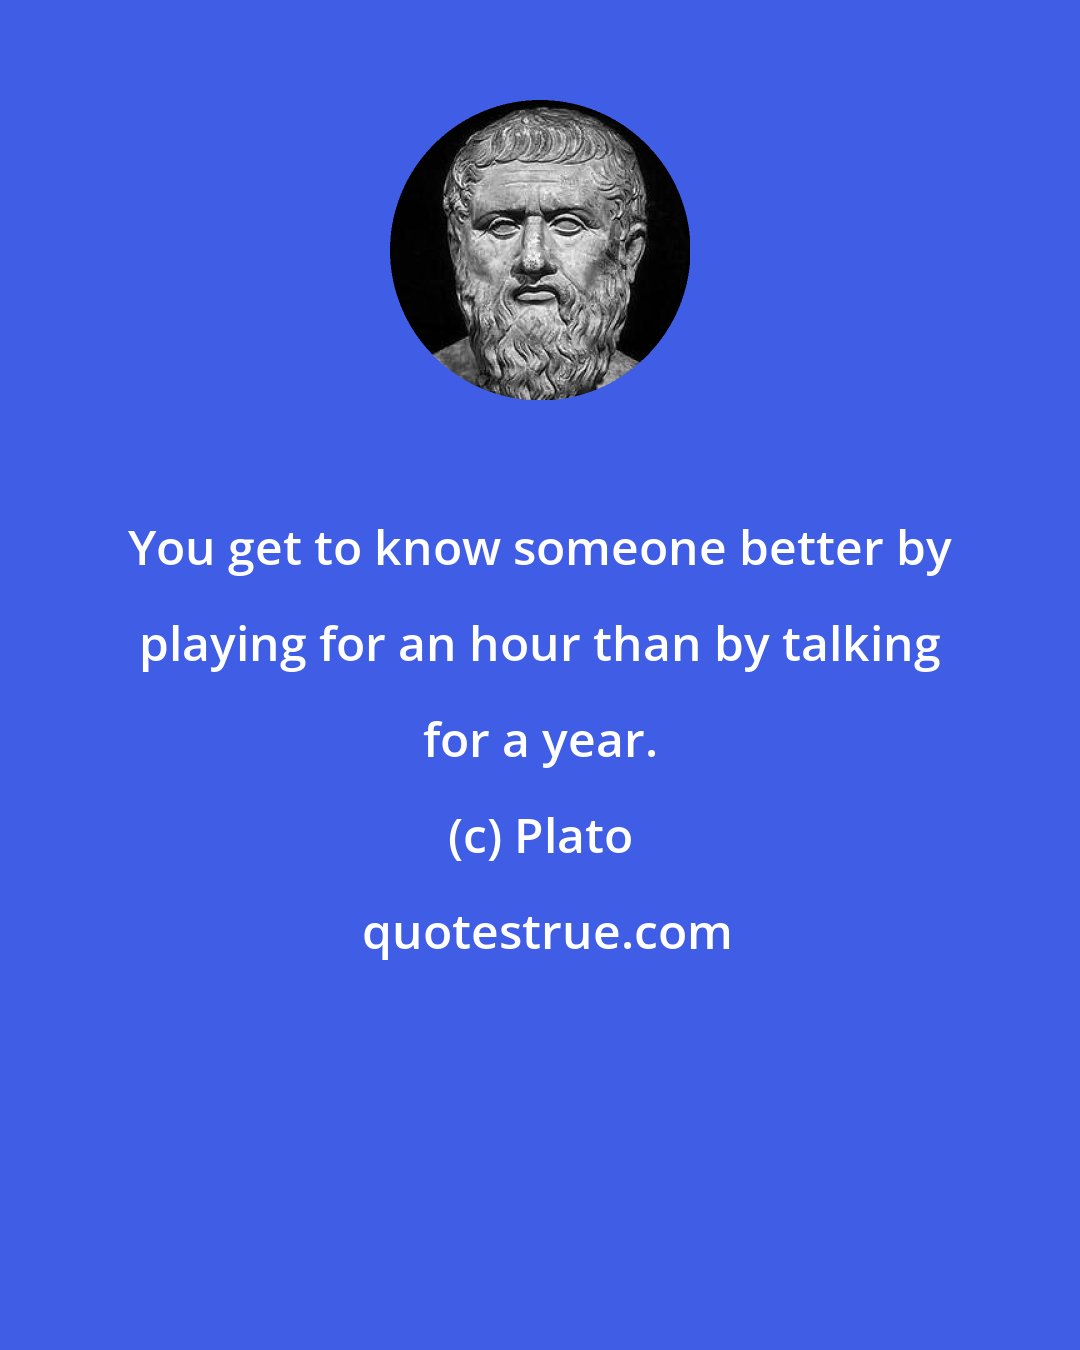 Plato: You get to know someone better by playing for an hour than by talking for a year.